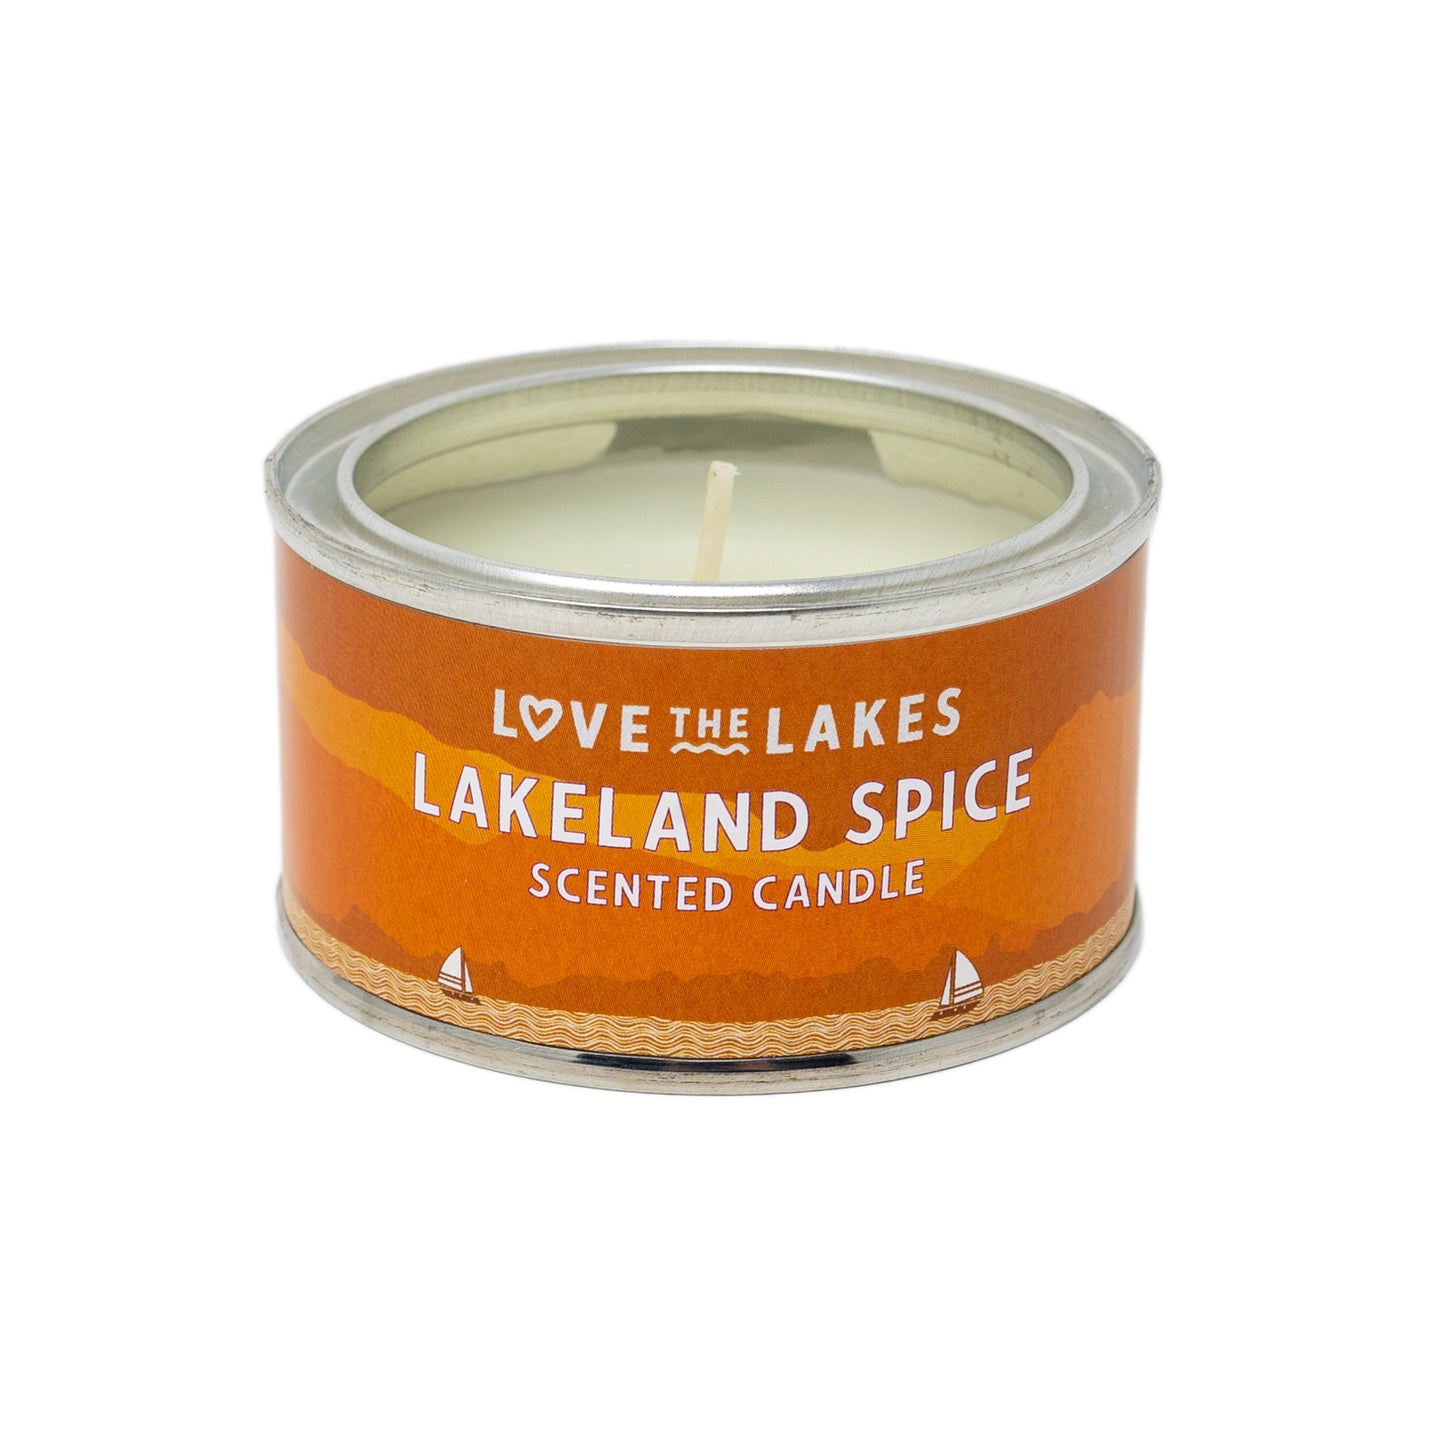 Love the Lakes Lakeland Spice Candle  - 3 sizes